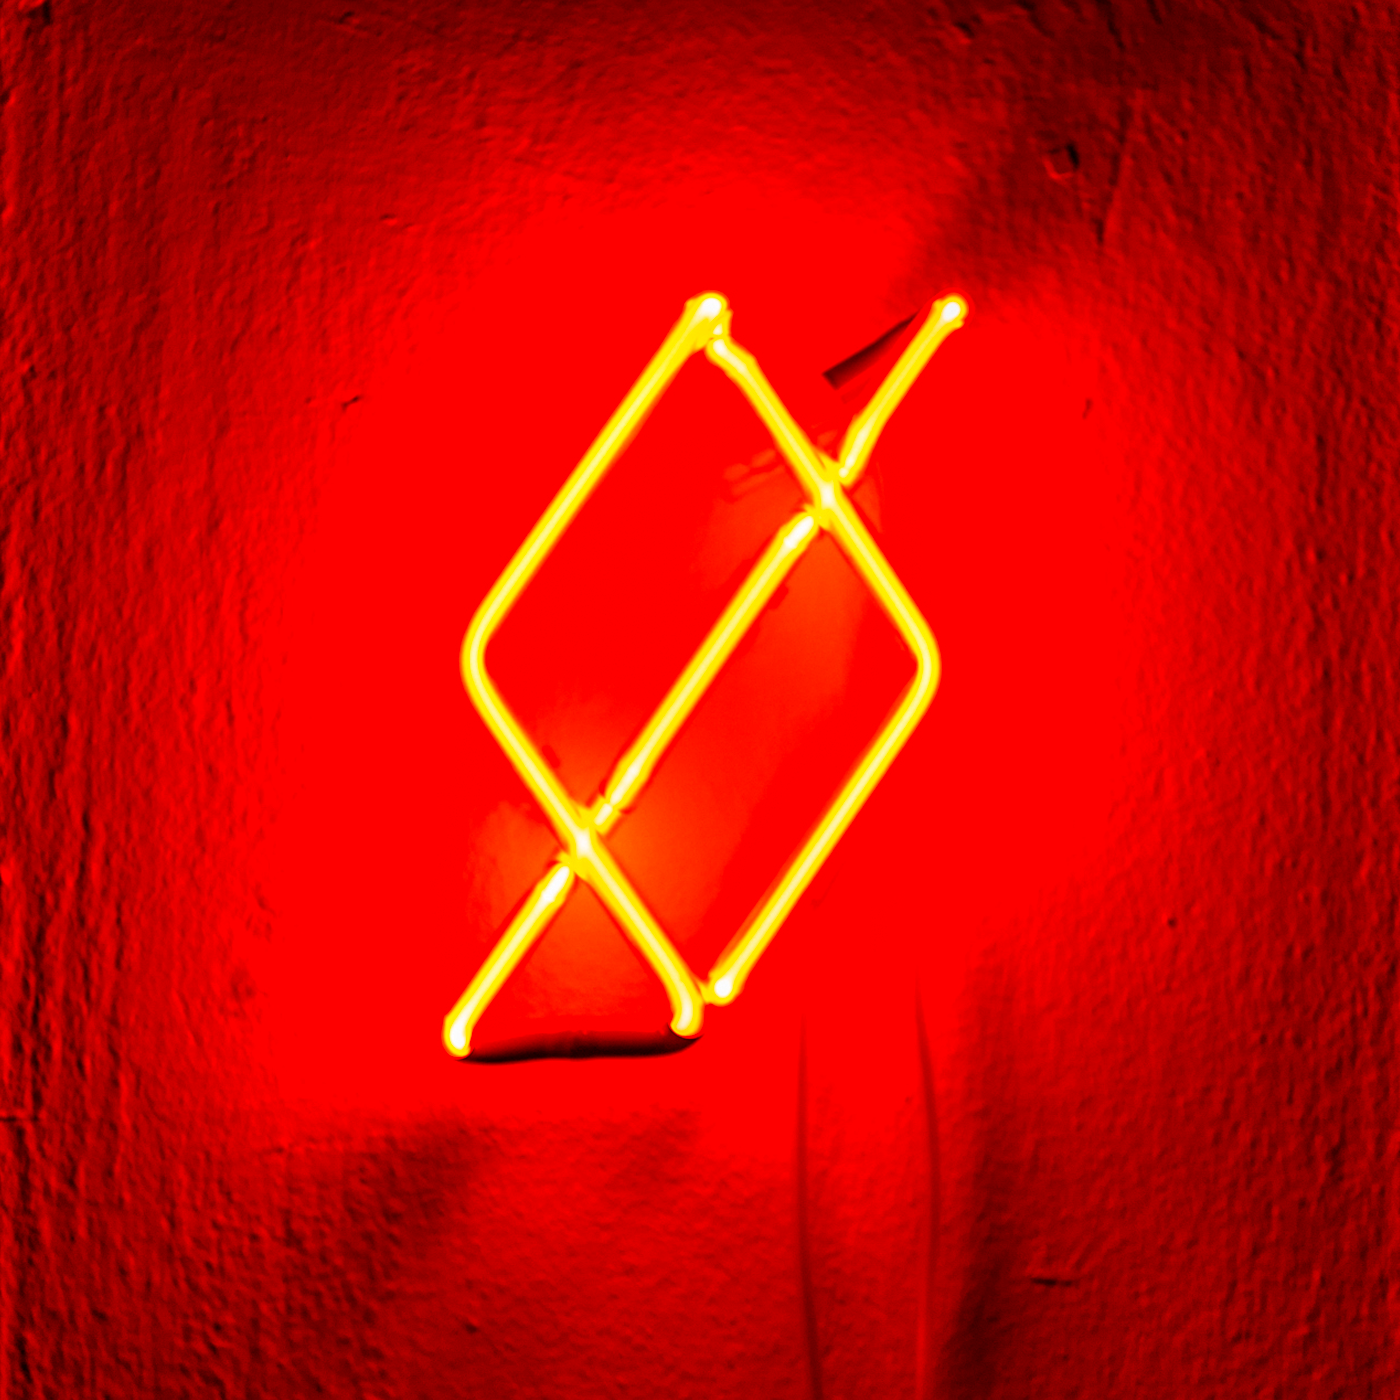 logo_studio_pajuba_neon_by_andre_levy_zhion.png